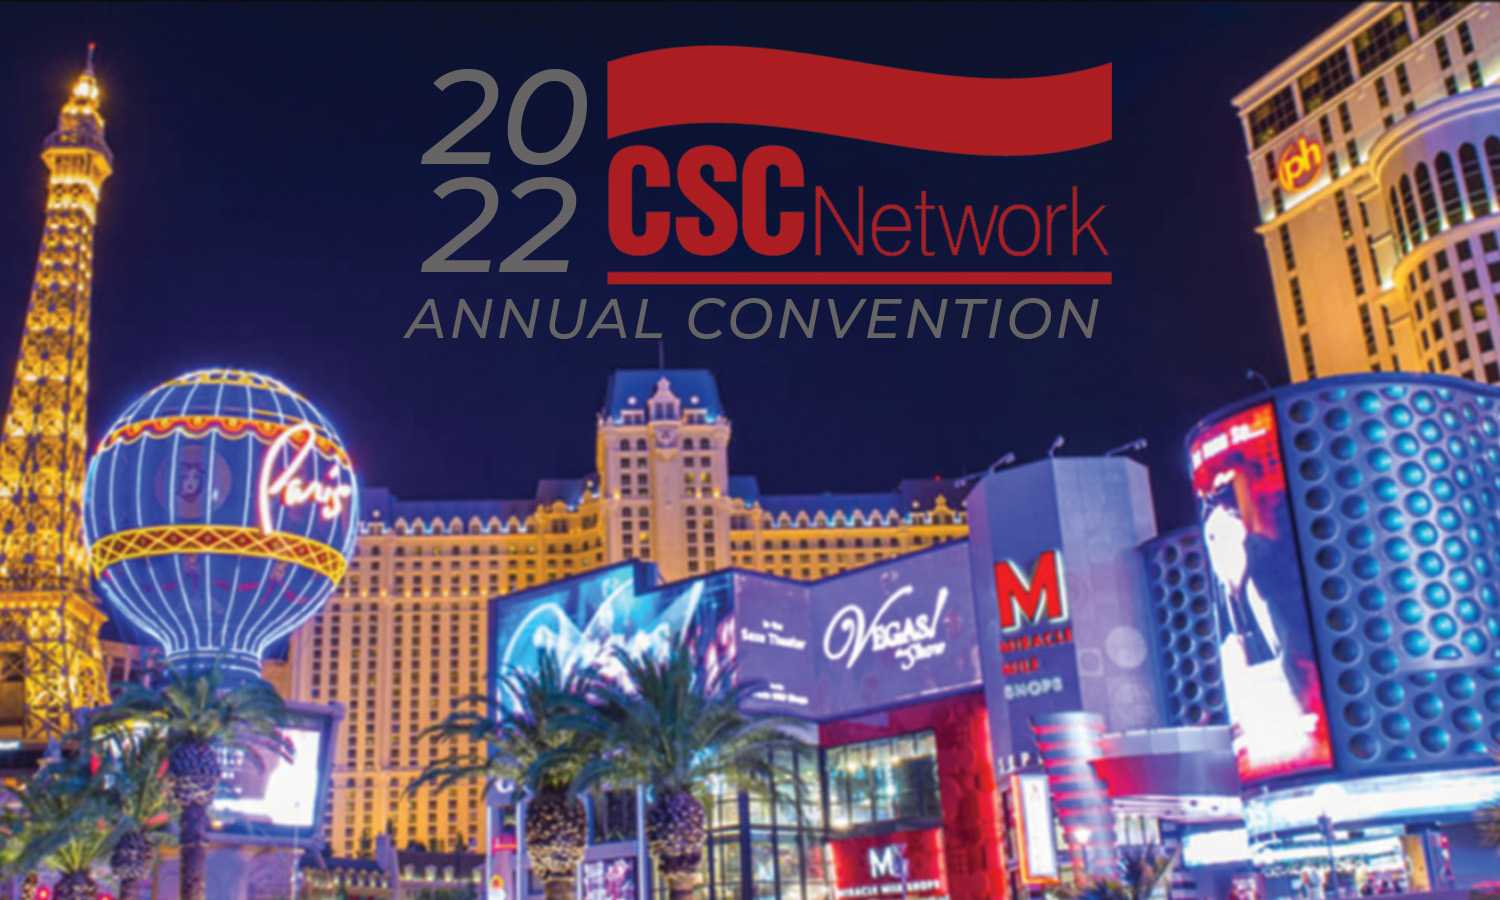 Norchem Team attends CSC Annual Convention 2022